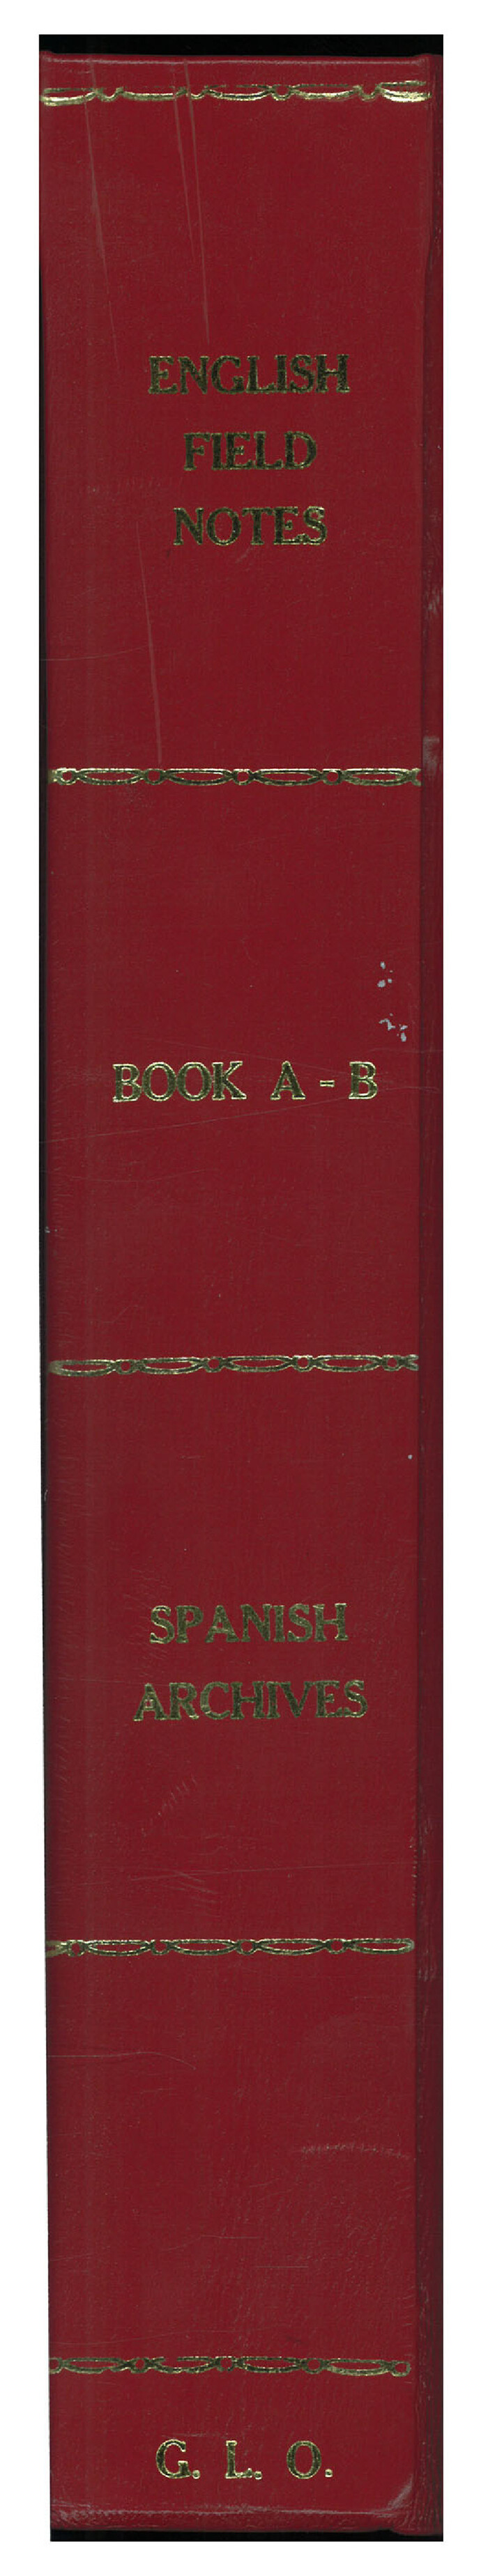 96540, English Field Notes of the Spanish Archives - Book A-B, Historical Volumes